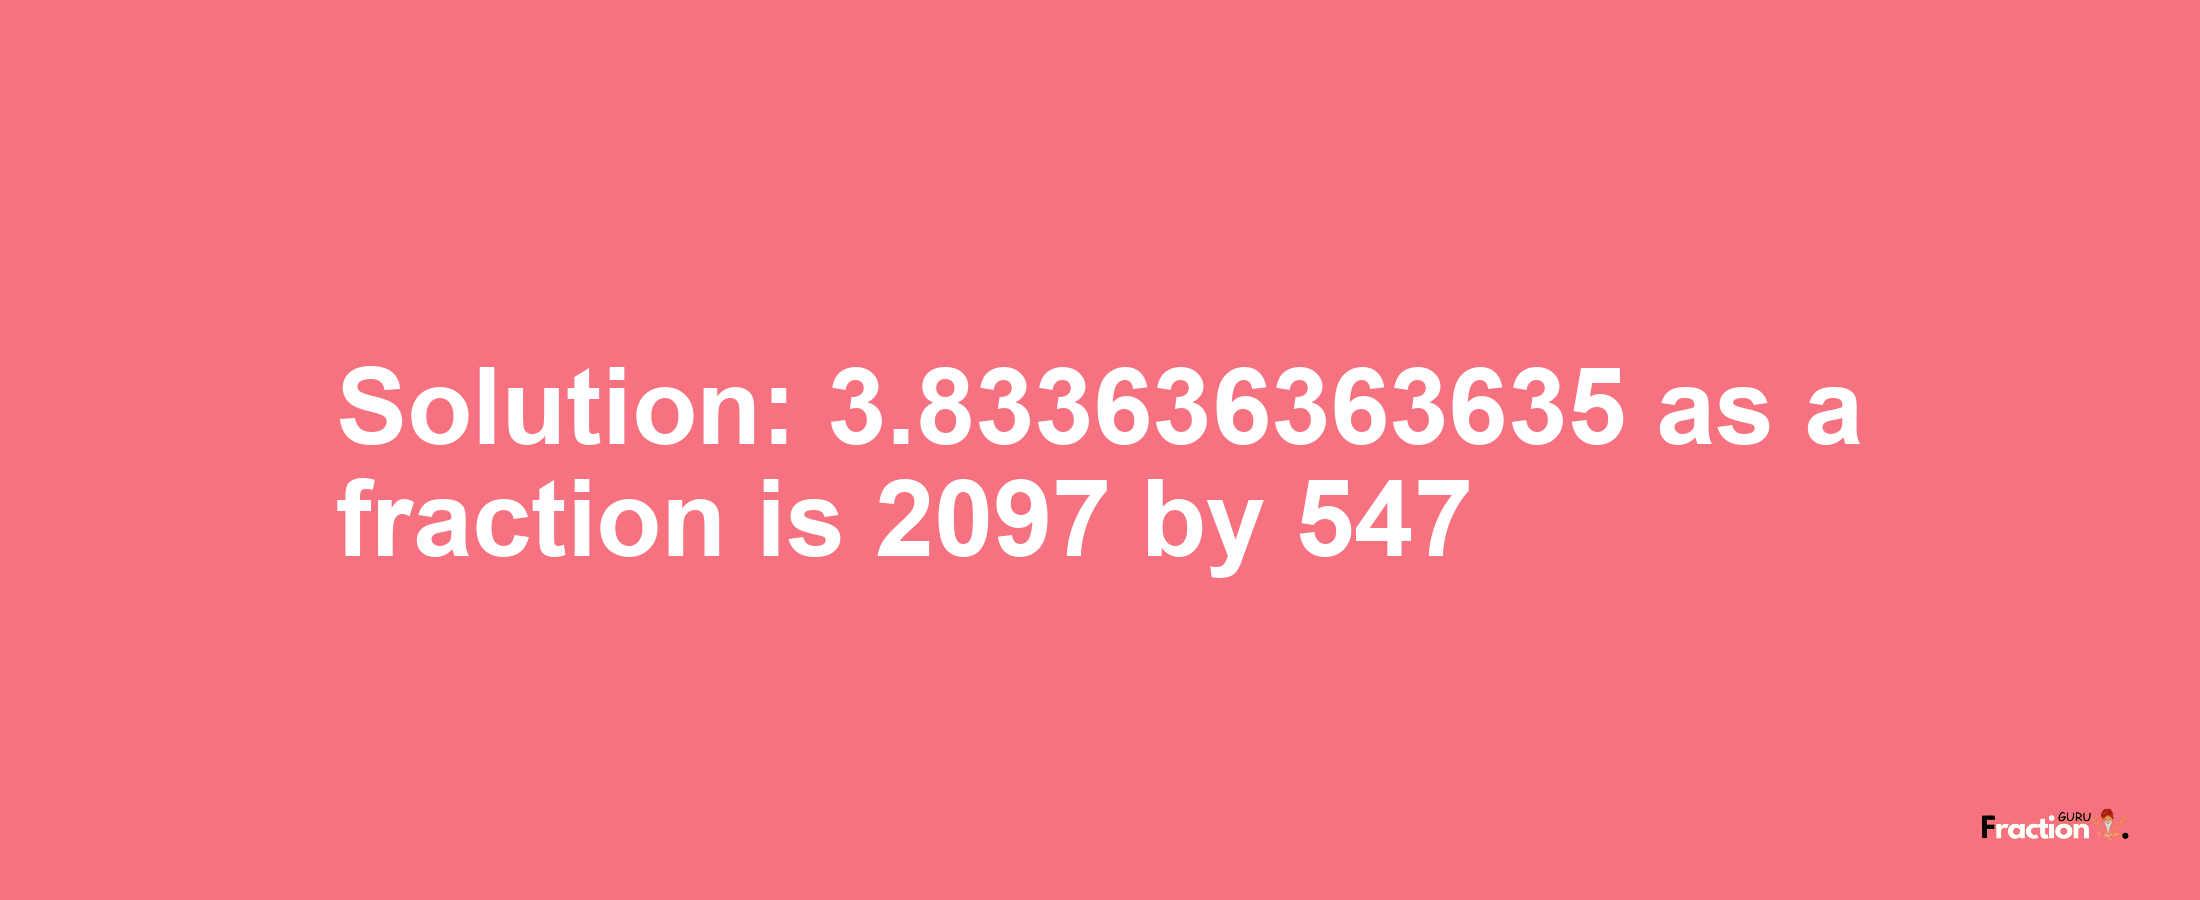 Solution:3.833636363635 as a fraction is 2097/547